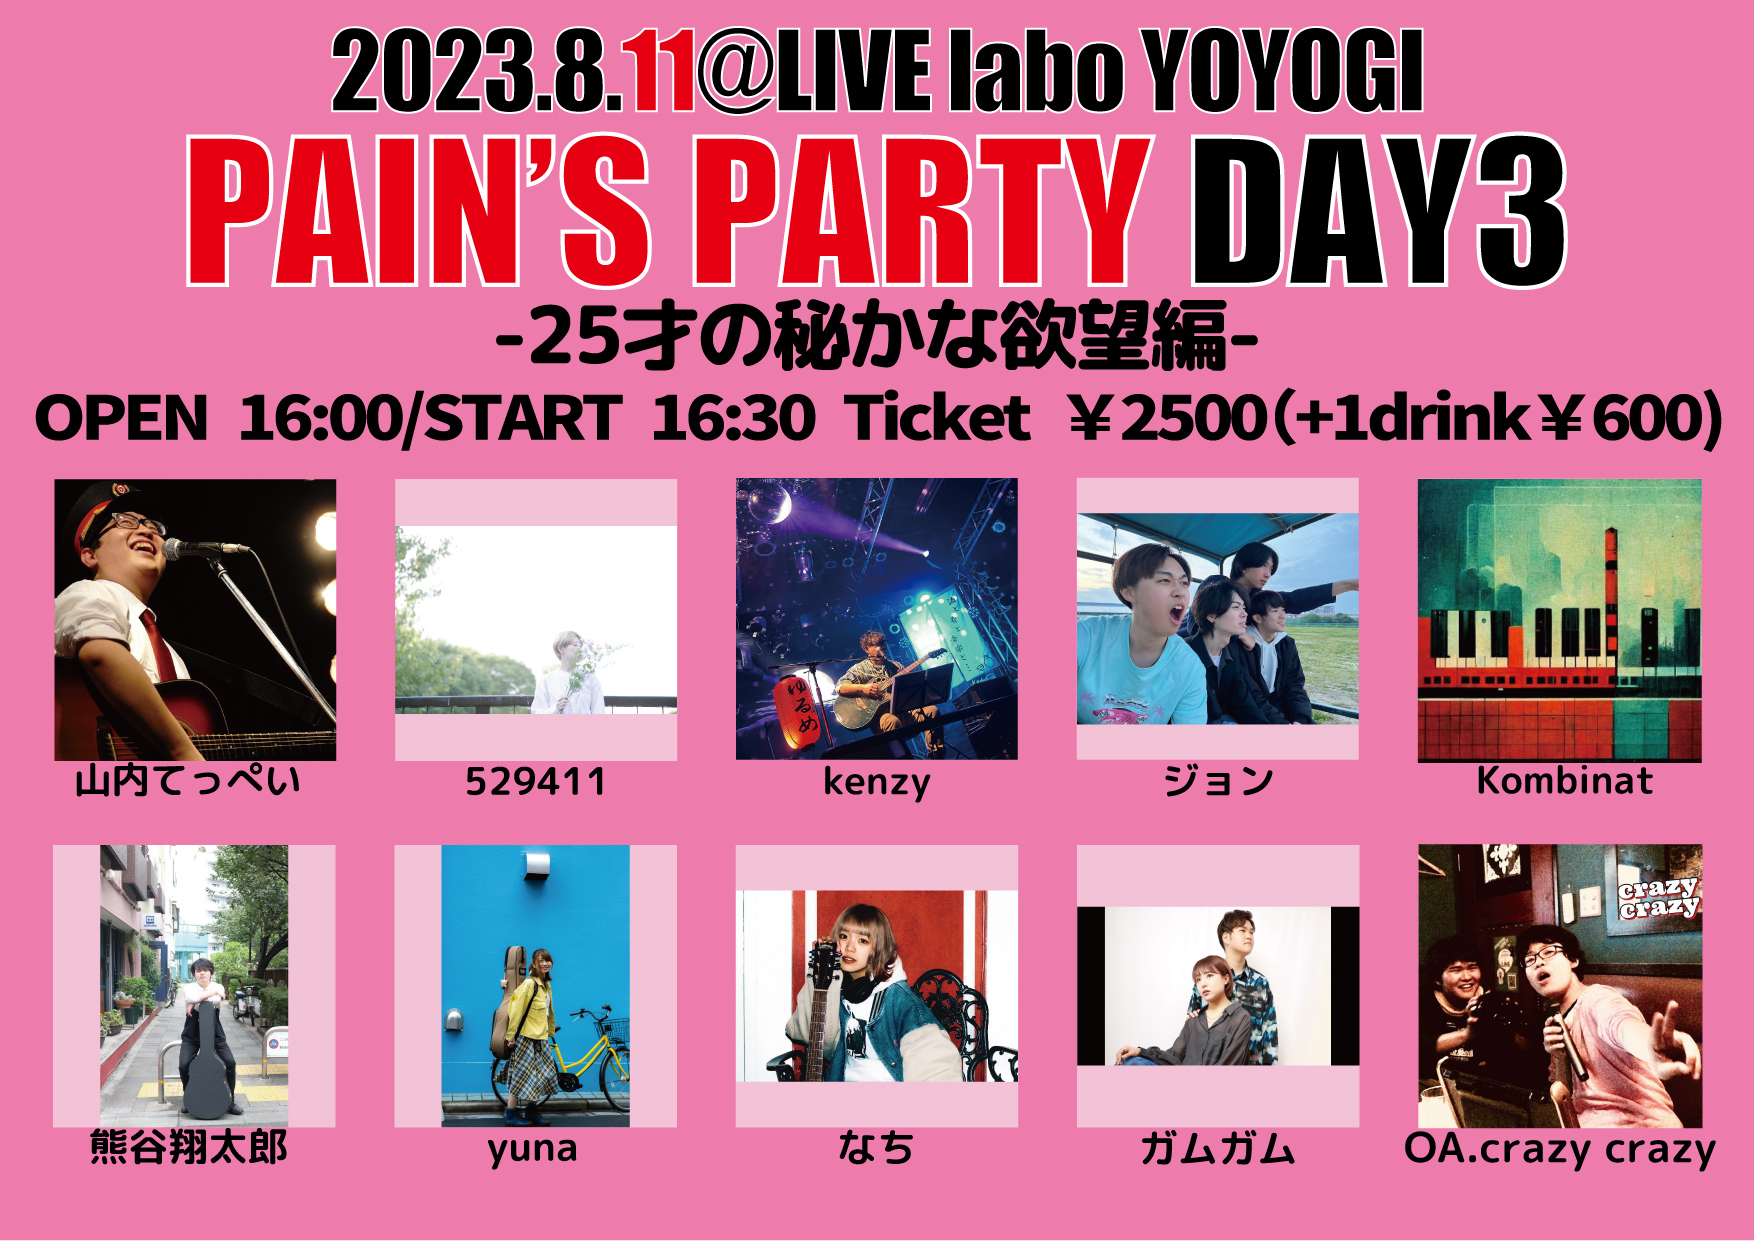 PAIN'S PARTY DAY3
-25才の秘かな欲望編-